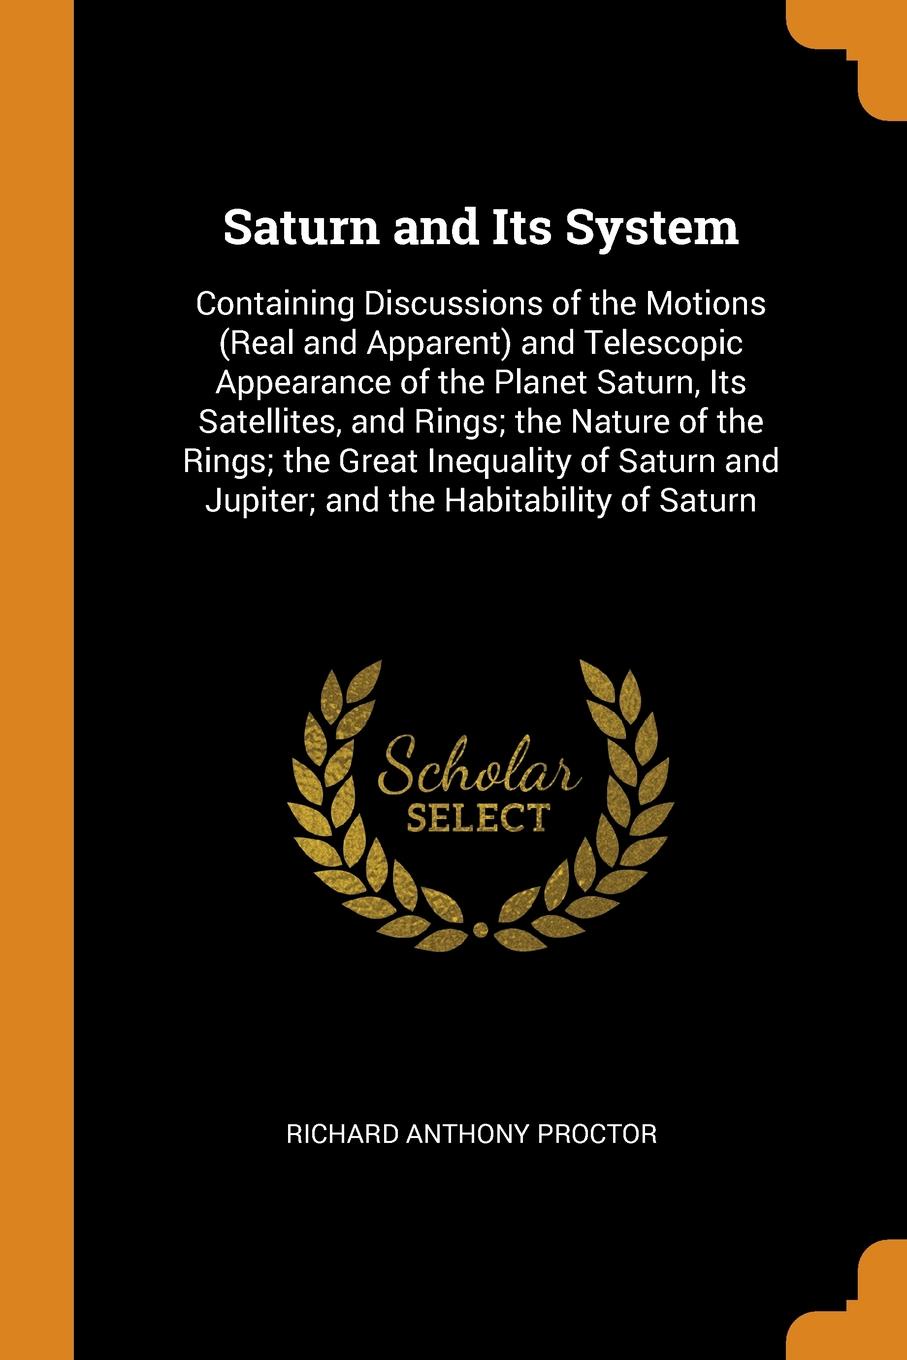 Saturn and Its System. Containing Discussions of the Motions (Real and Apparent) and Telescopic Appearance of the Planet Saturn, Its Satellites, and Rings; the Nature of the Rings; the Great Inequality of Saturn and Jupiter; and the Habitability o...